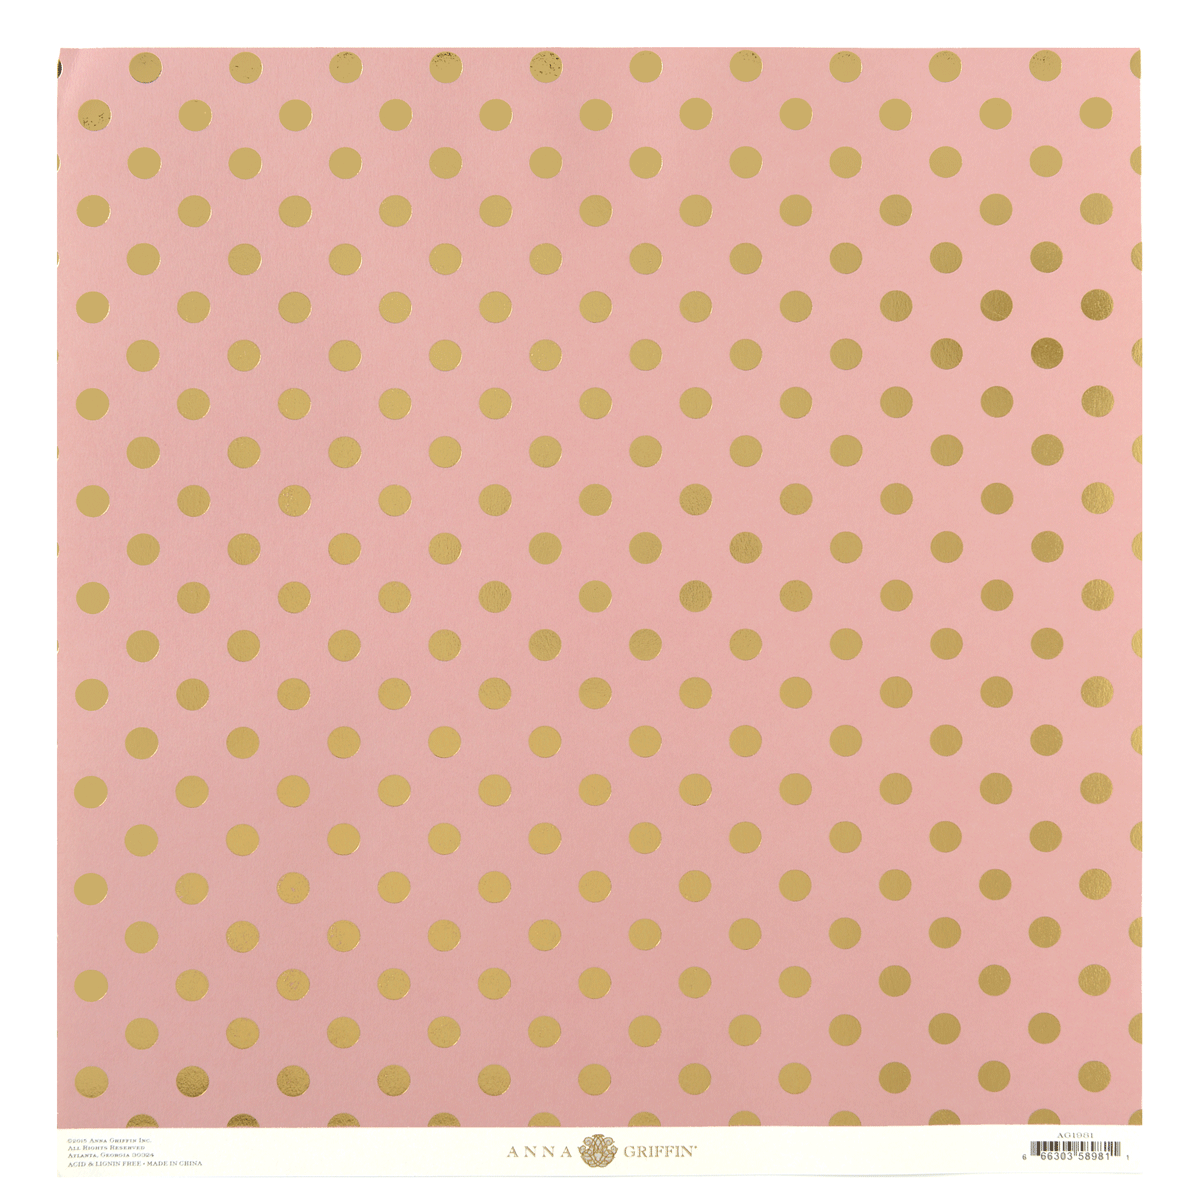 a pink background with gold polka dots.